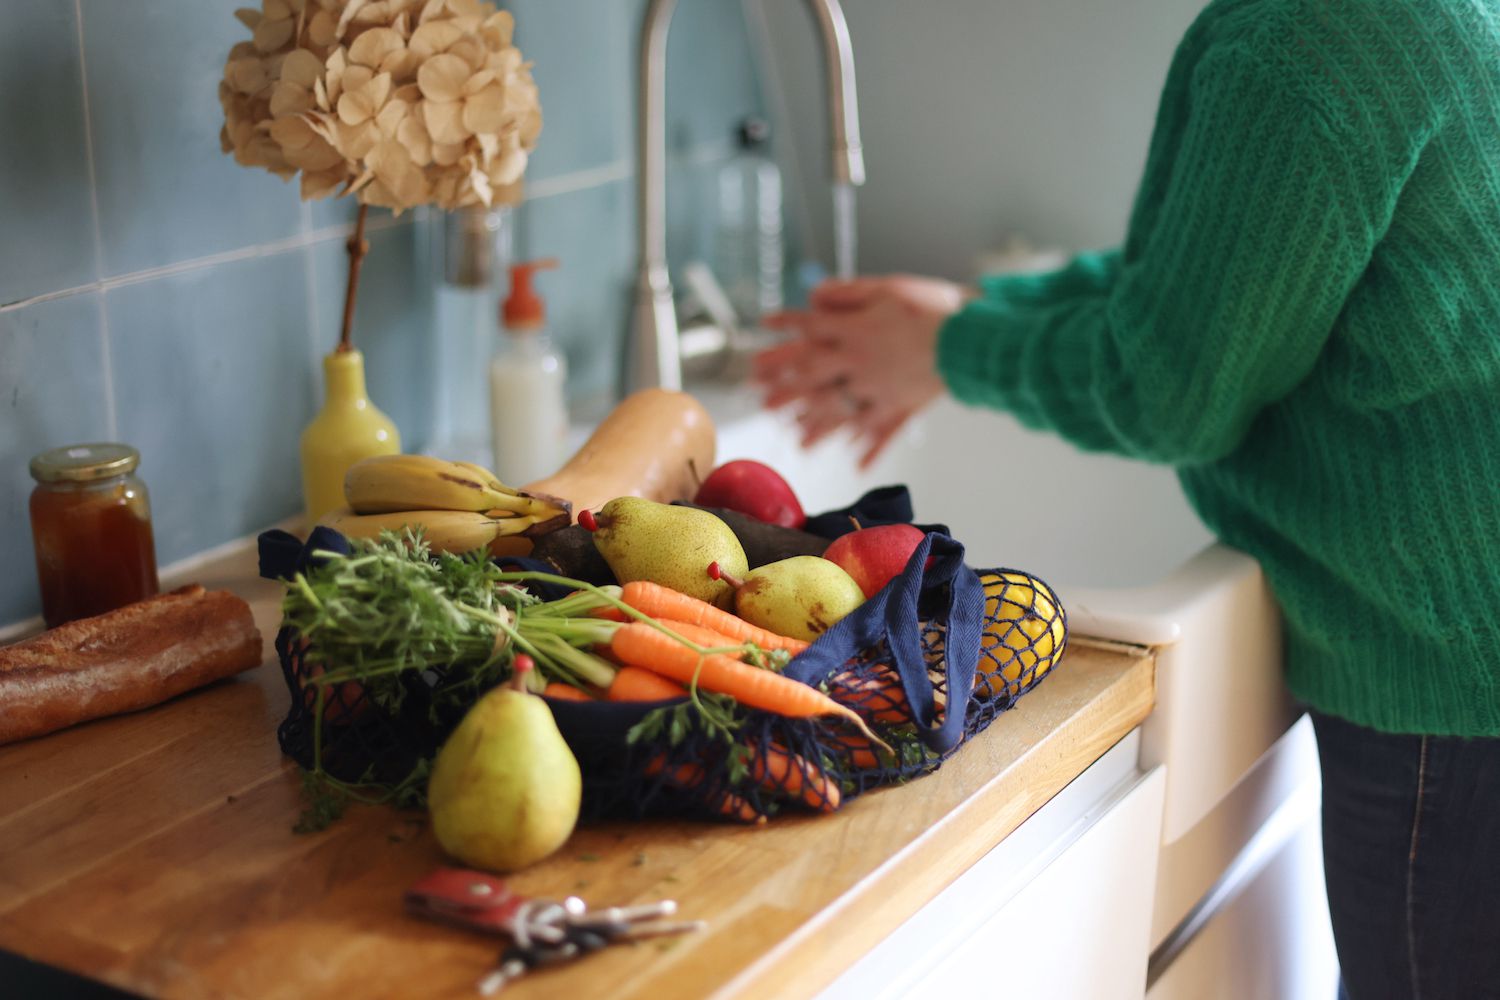 How can you maintain a healthy diet on a budget?